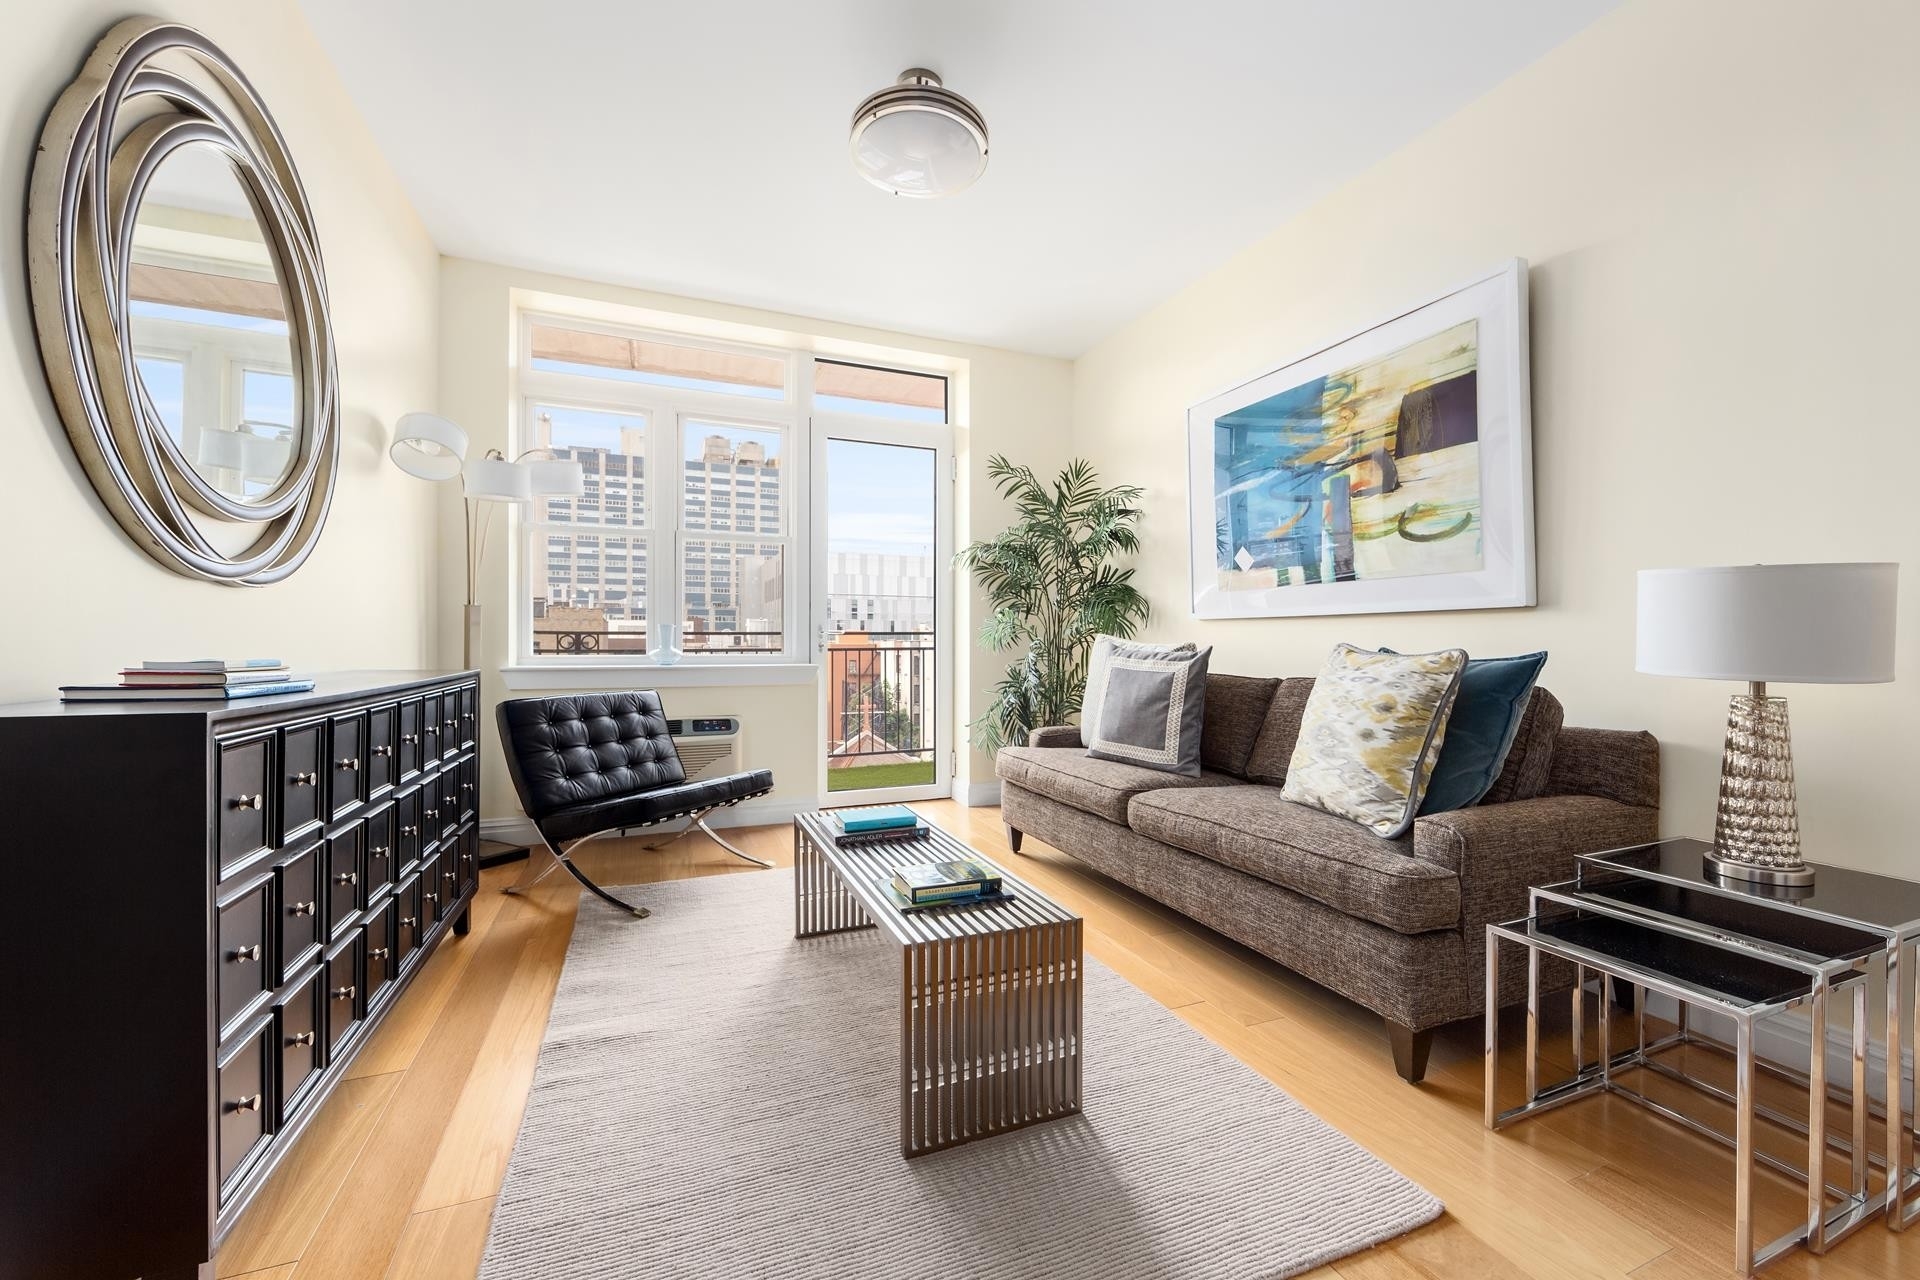 Property at 70 West 139th St, 3B New York